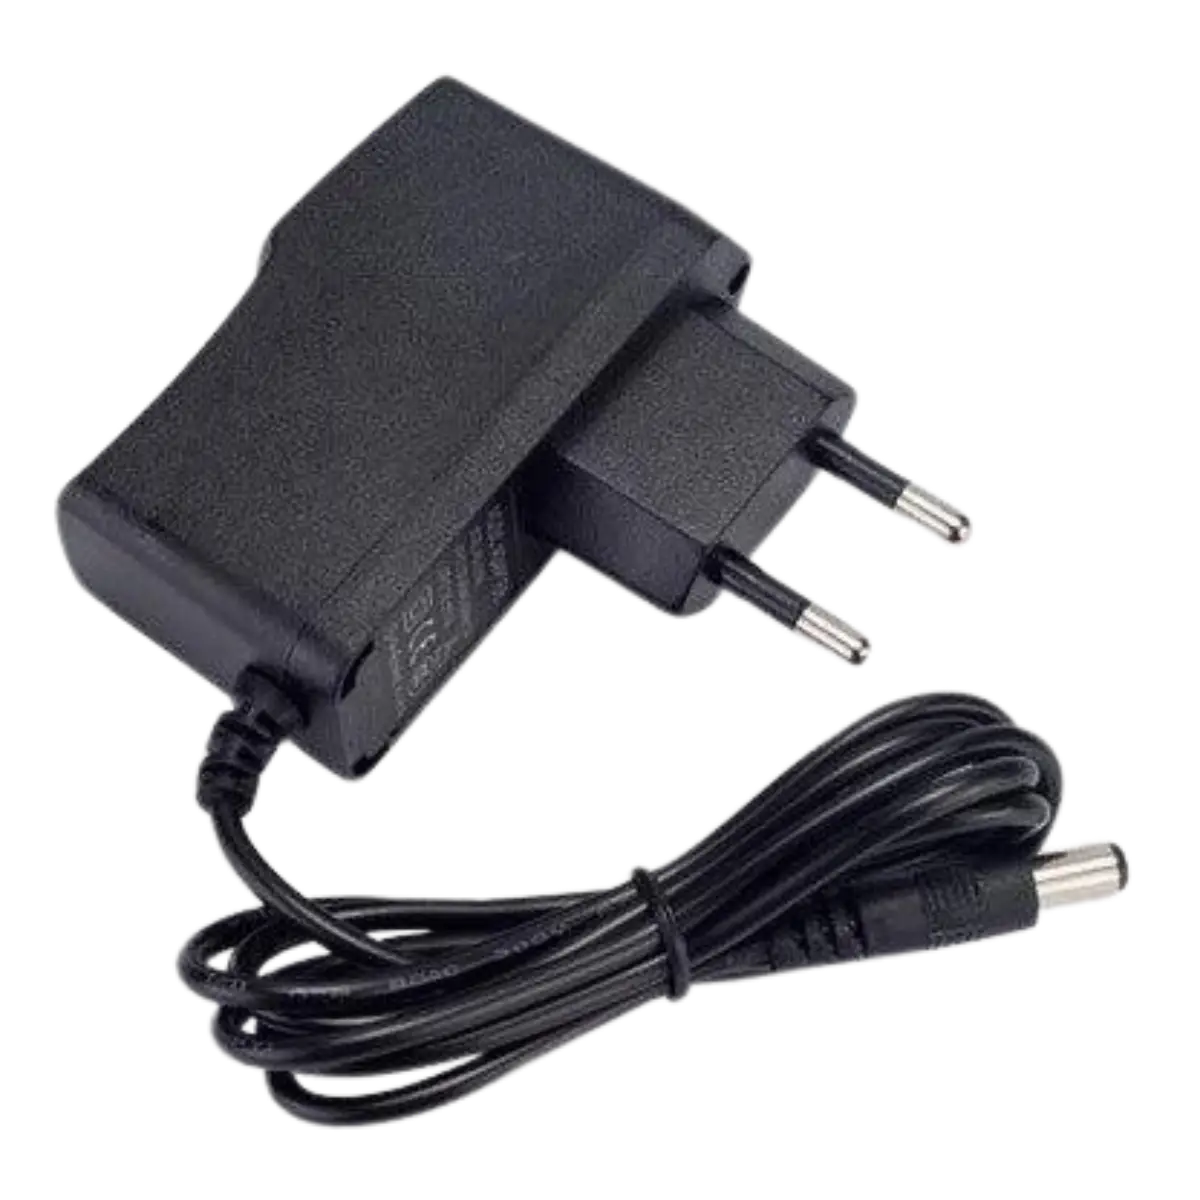 12.6V 1A charger for 3S lithium-ion battery